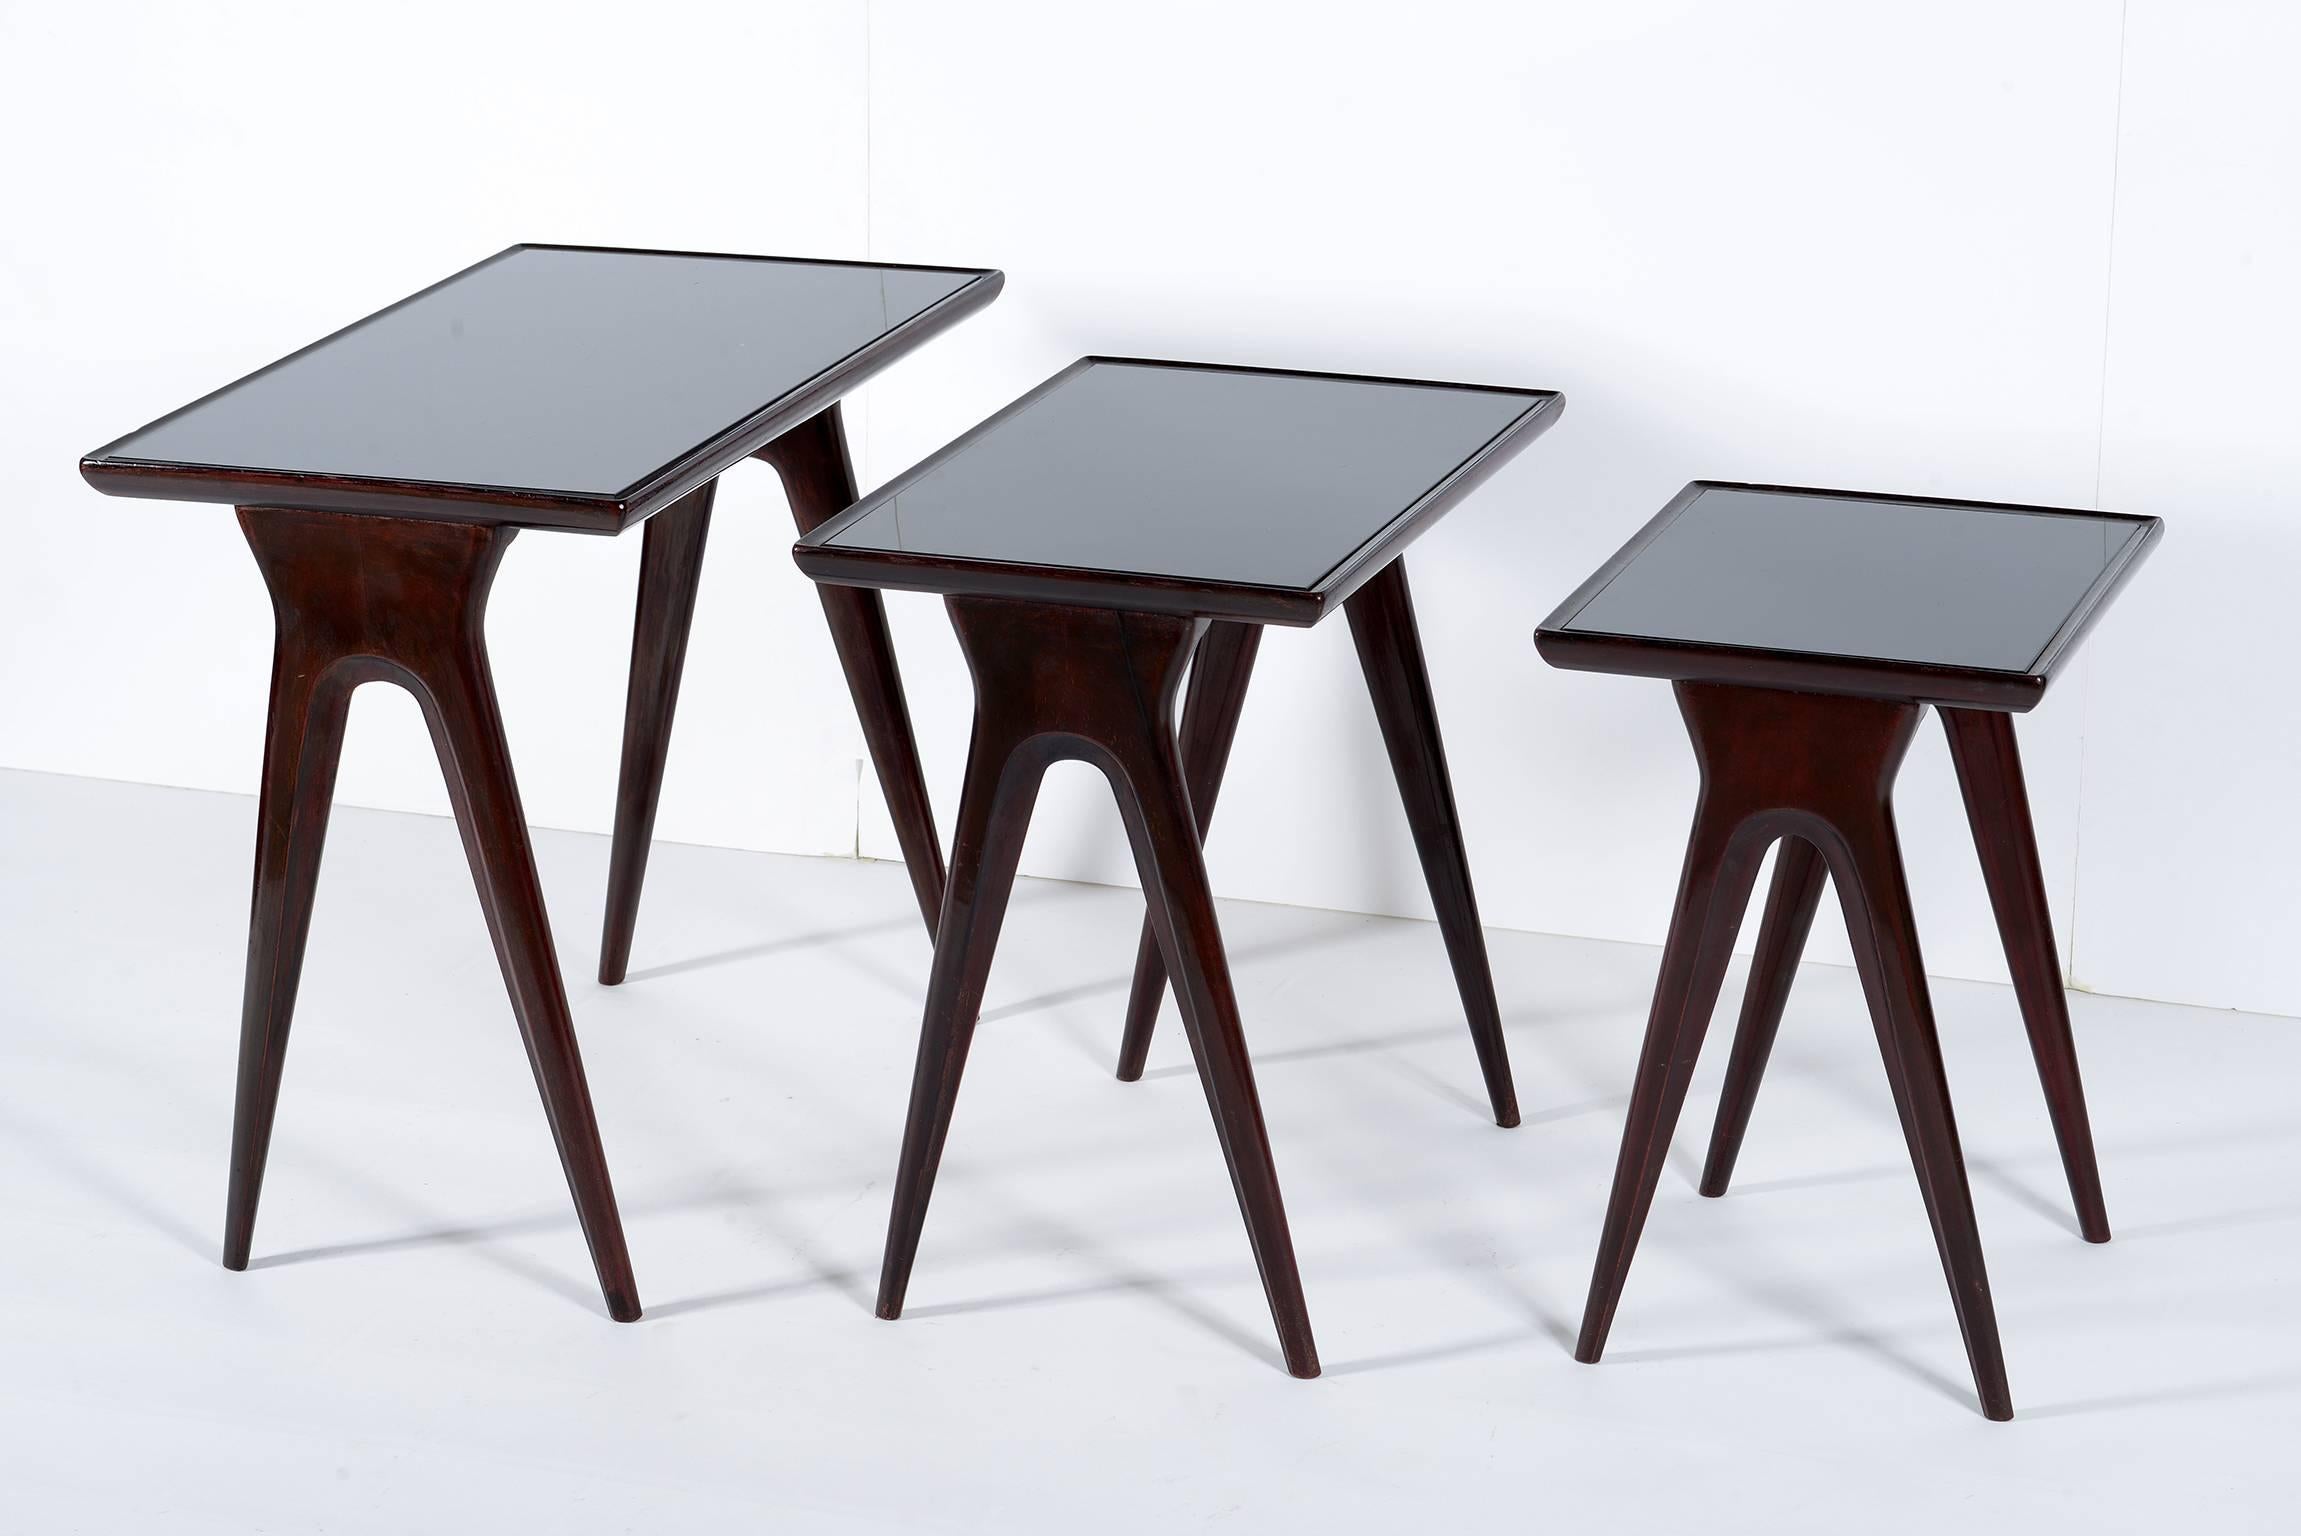 Italian Midcentury Stacking Tables 1